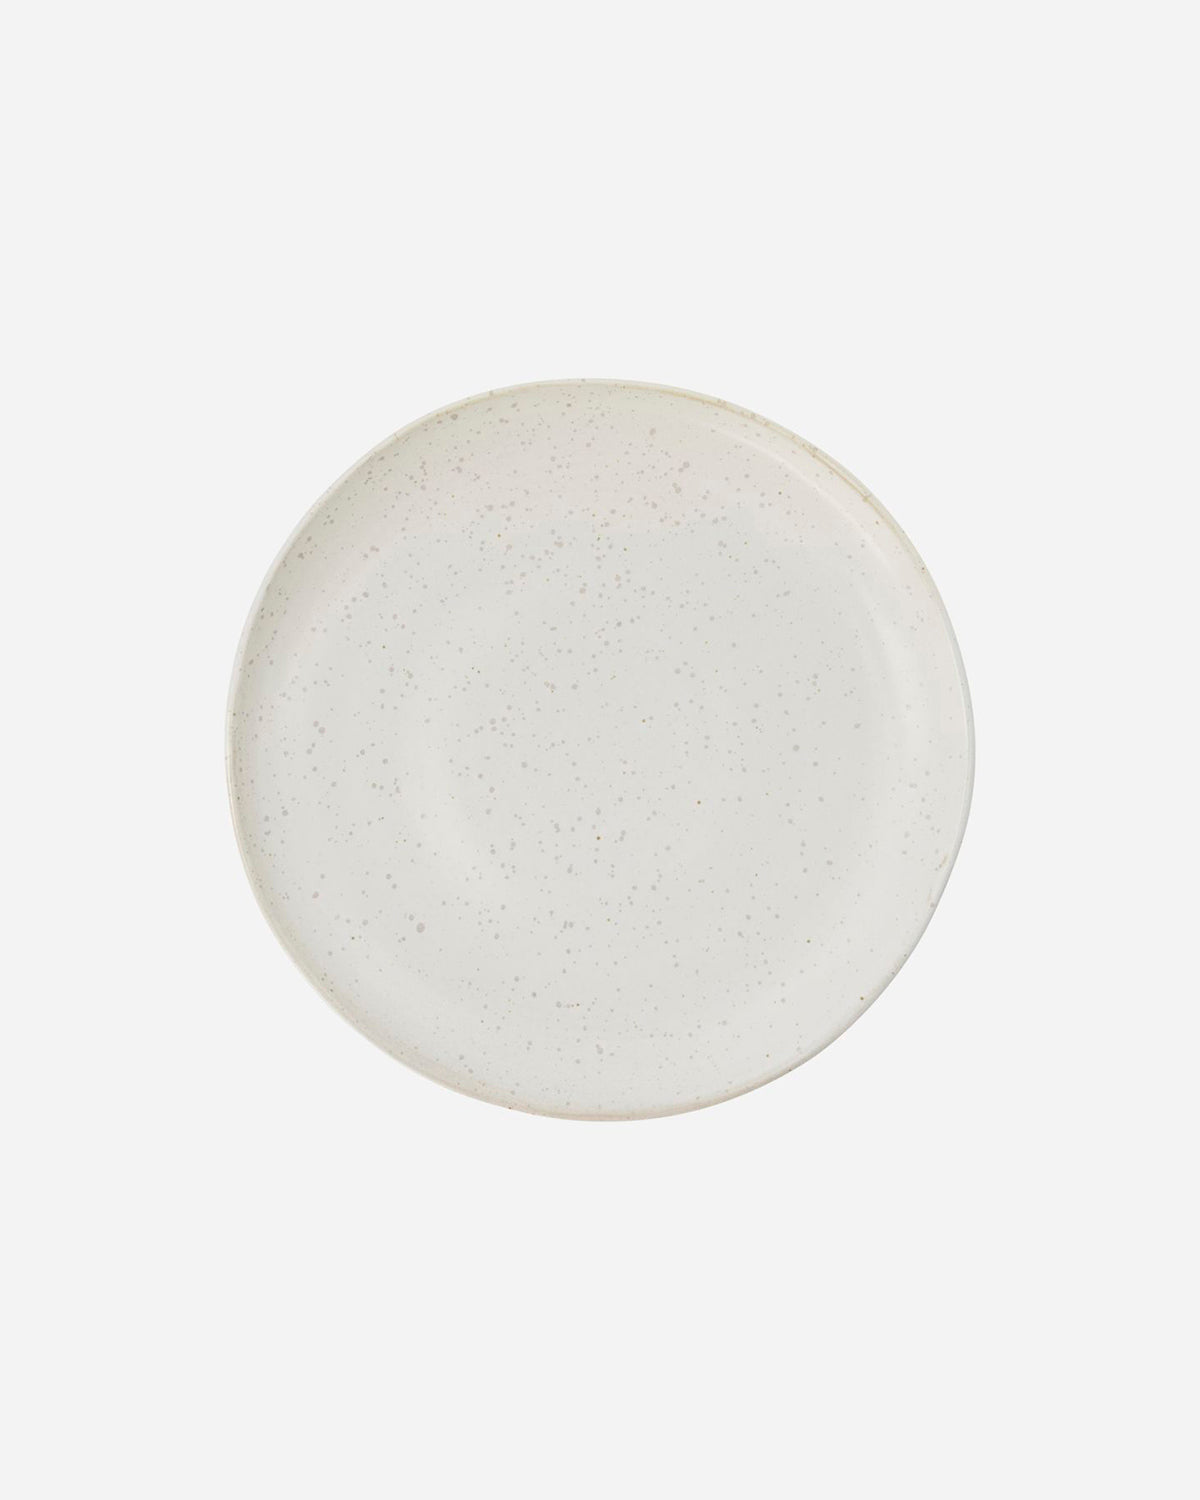 SIDE PLATE - WHITE SPECKLED